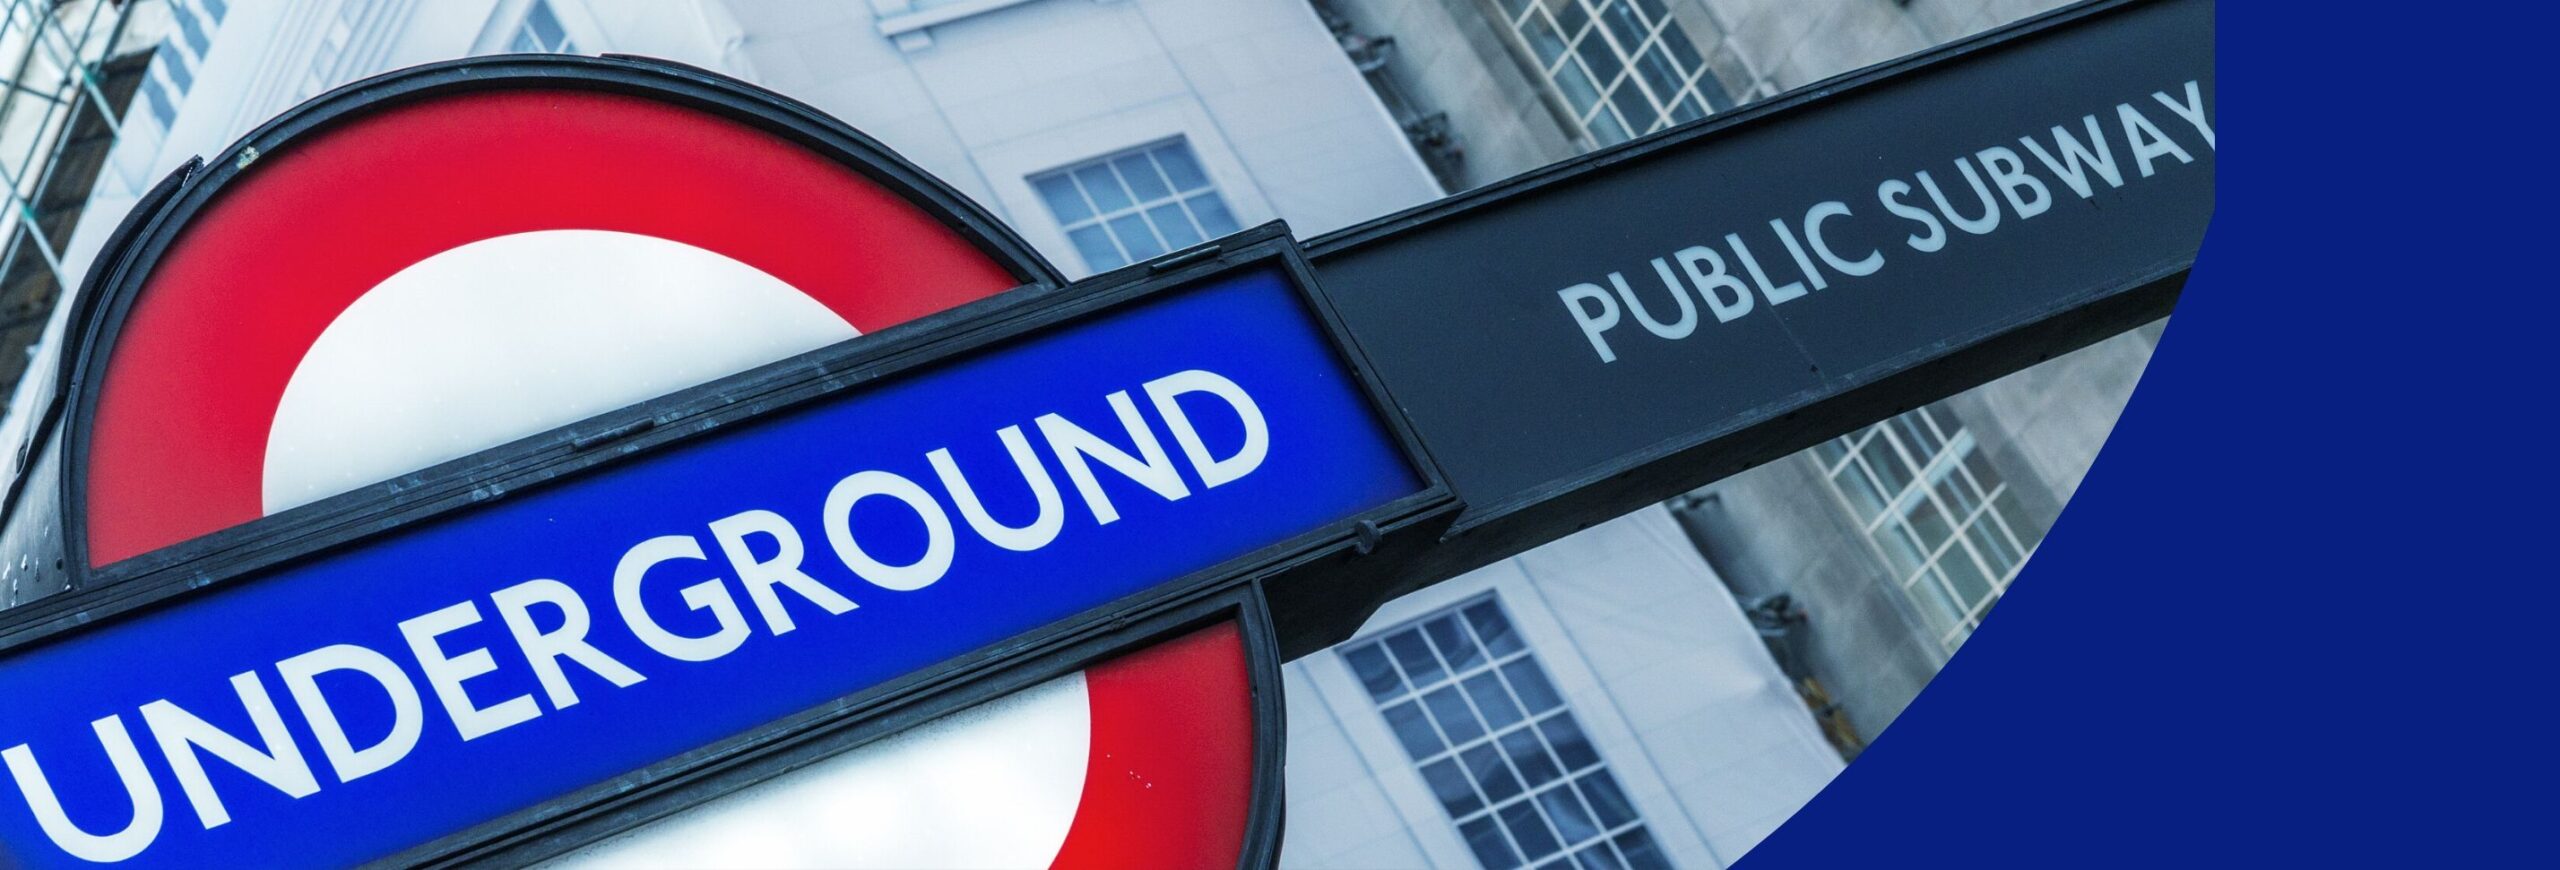 Image shows the red, white and blue London Underground sign.